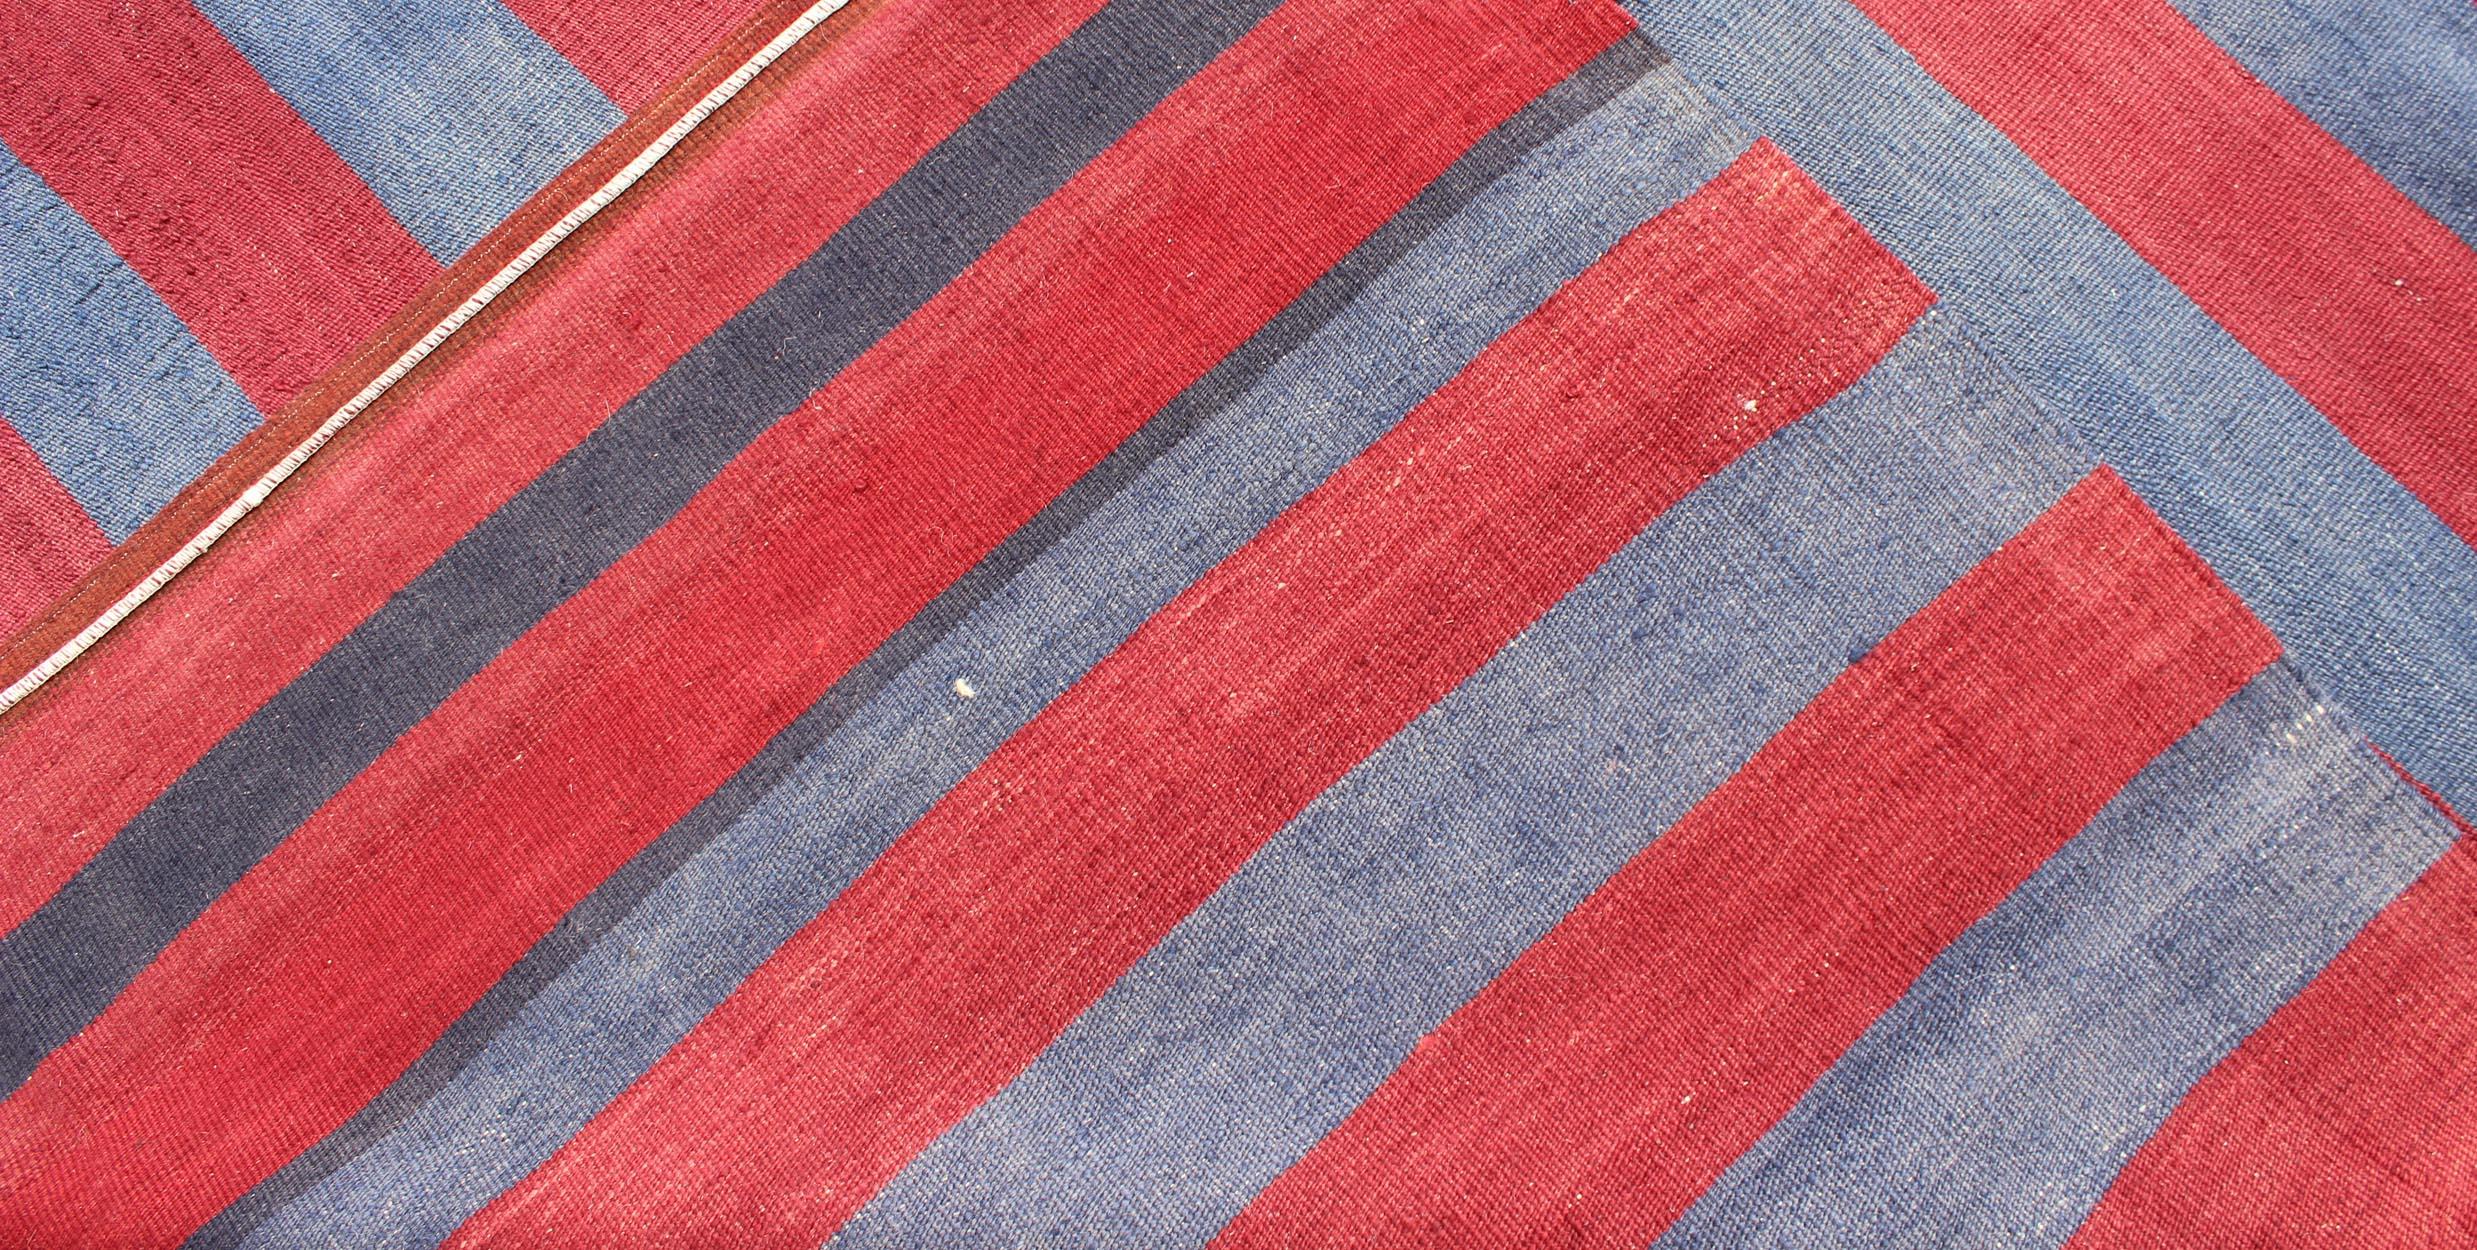 Vintage Striped Turkish Kilim with Casual Modern Design in Red and Blue For Sale 1